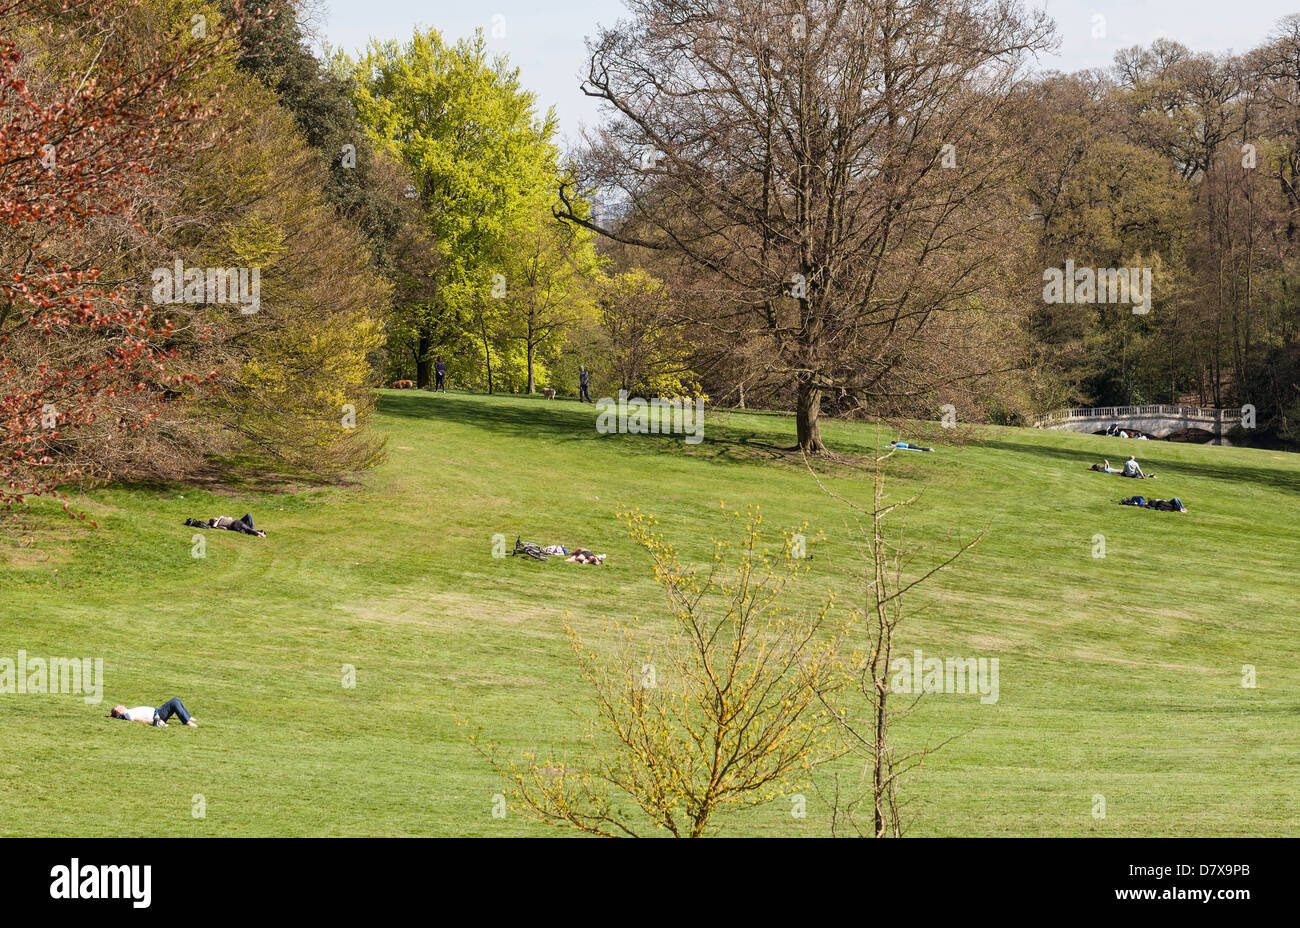 Scattered sunbathers laying down on a grassy field, Hampstead Heath, London, England, UK. Stock Photo